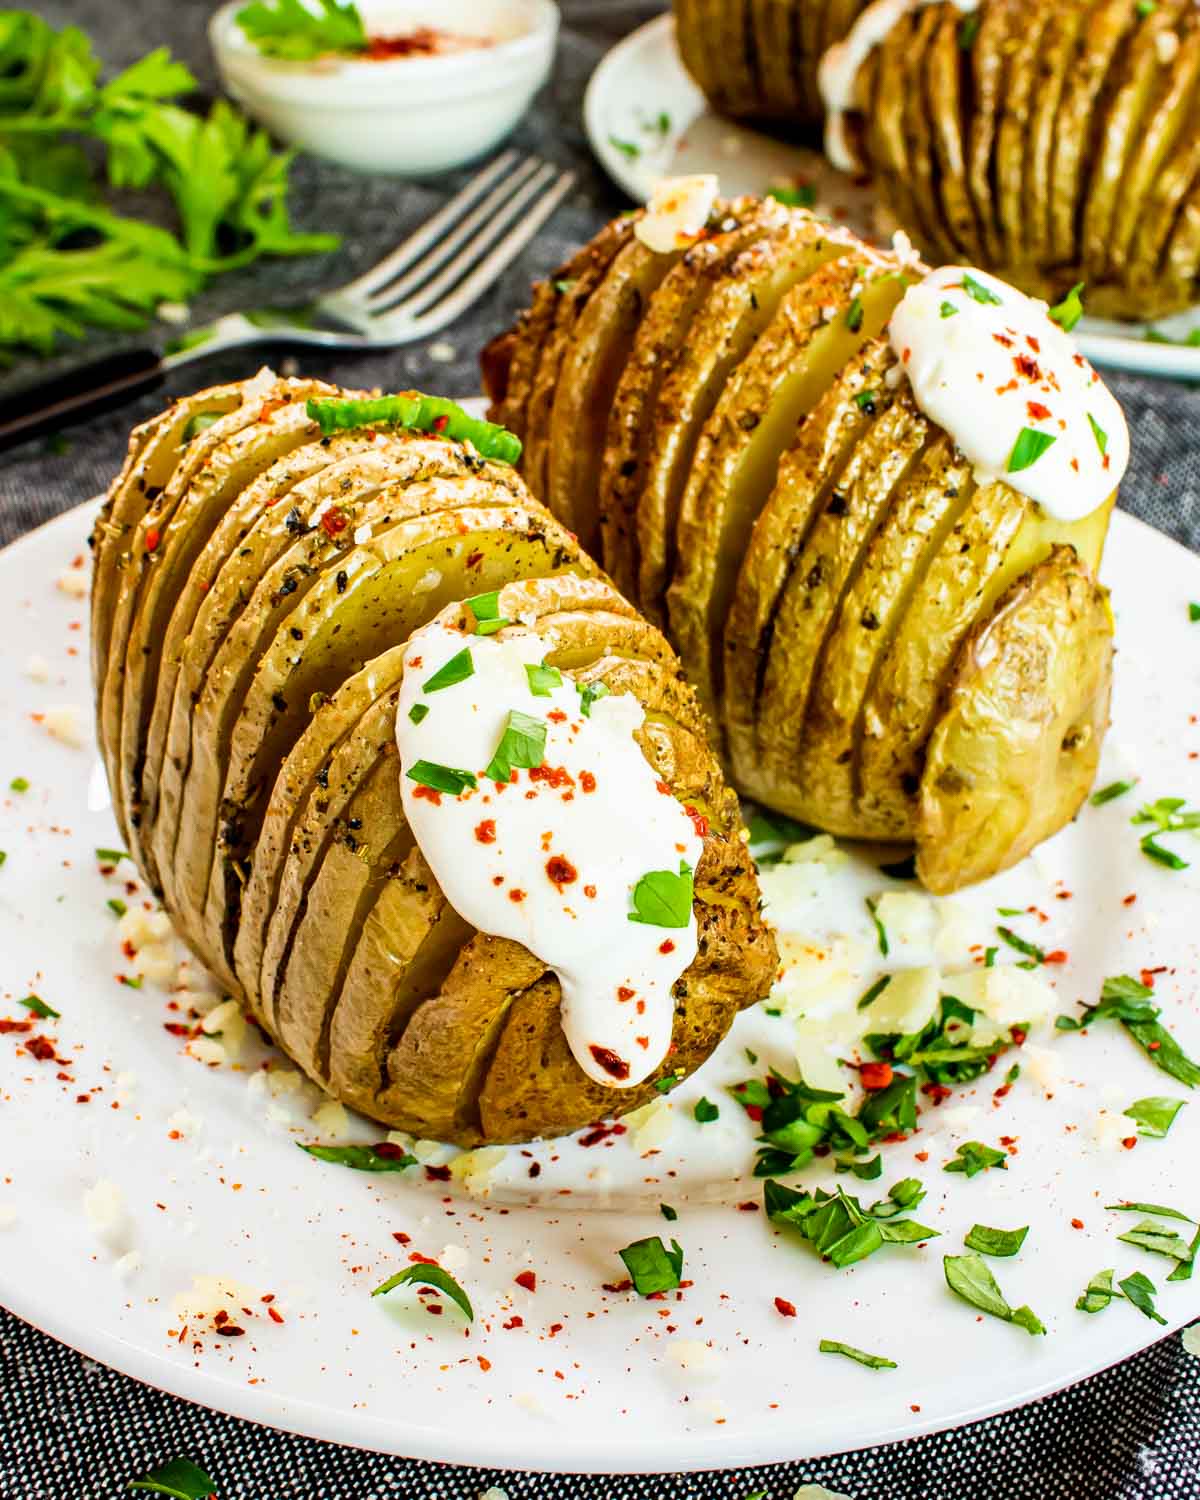 2 hasselback potatoes on a white plate garnished with sour cream and parsley.